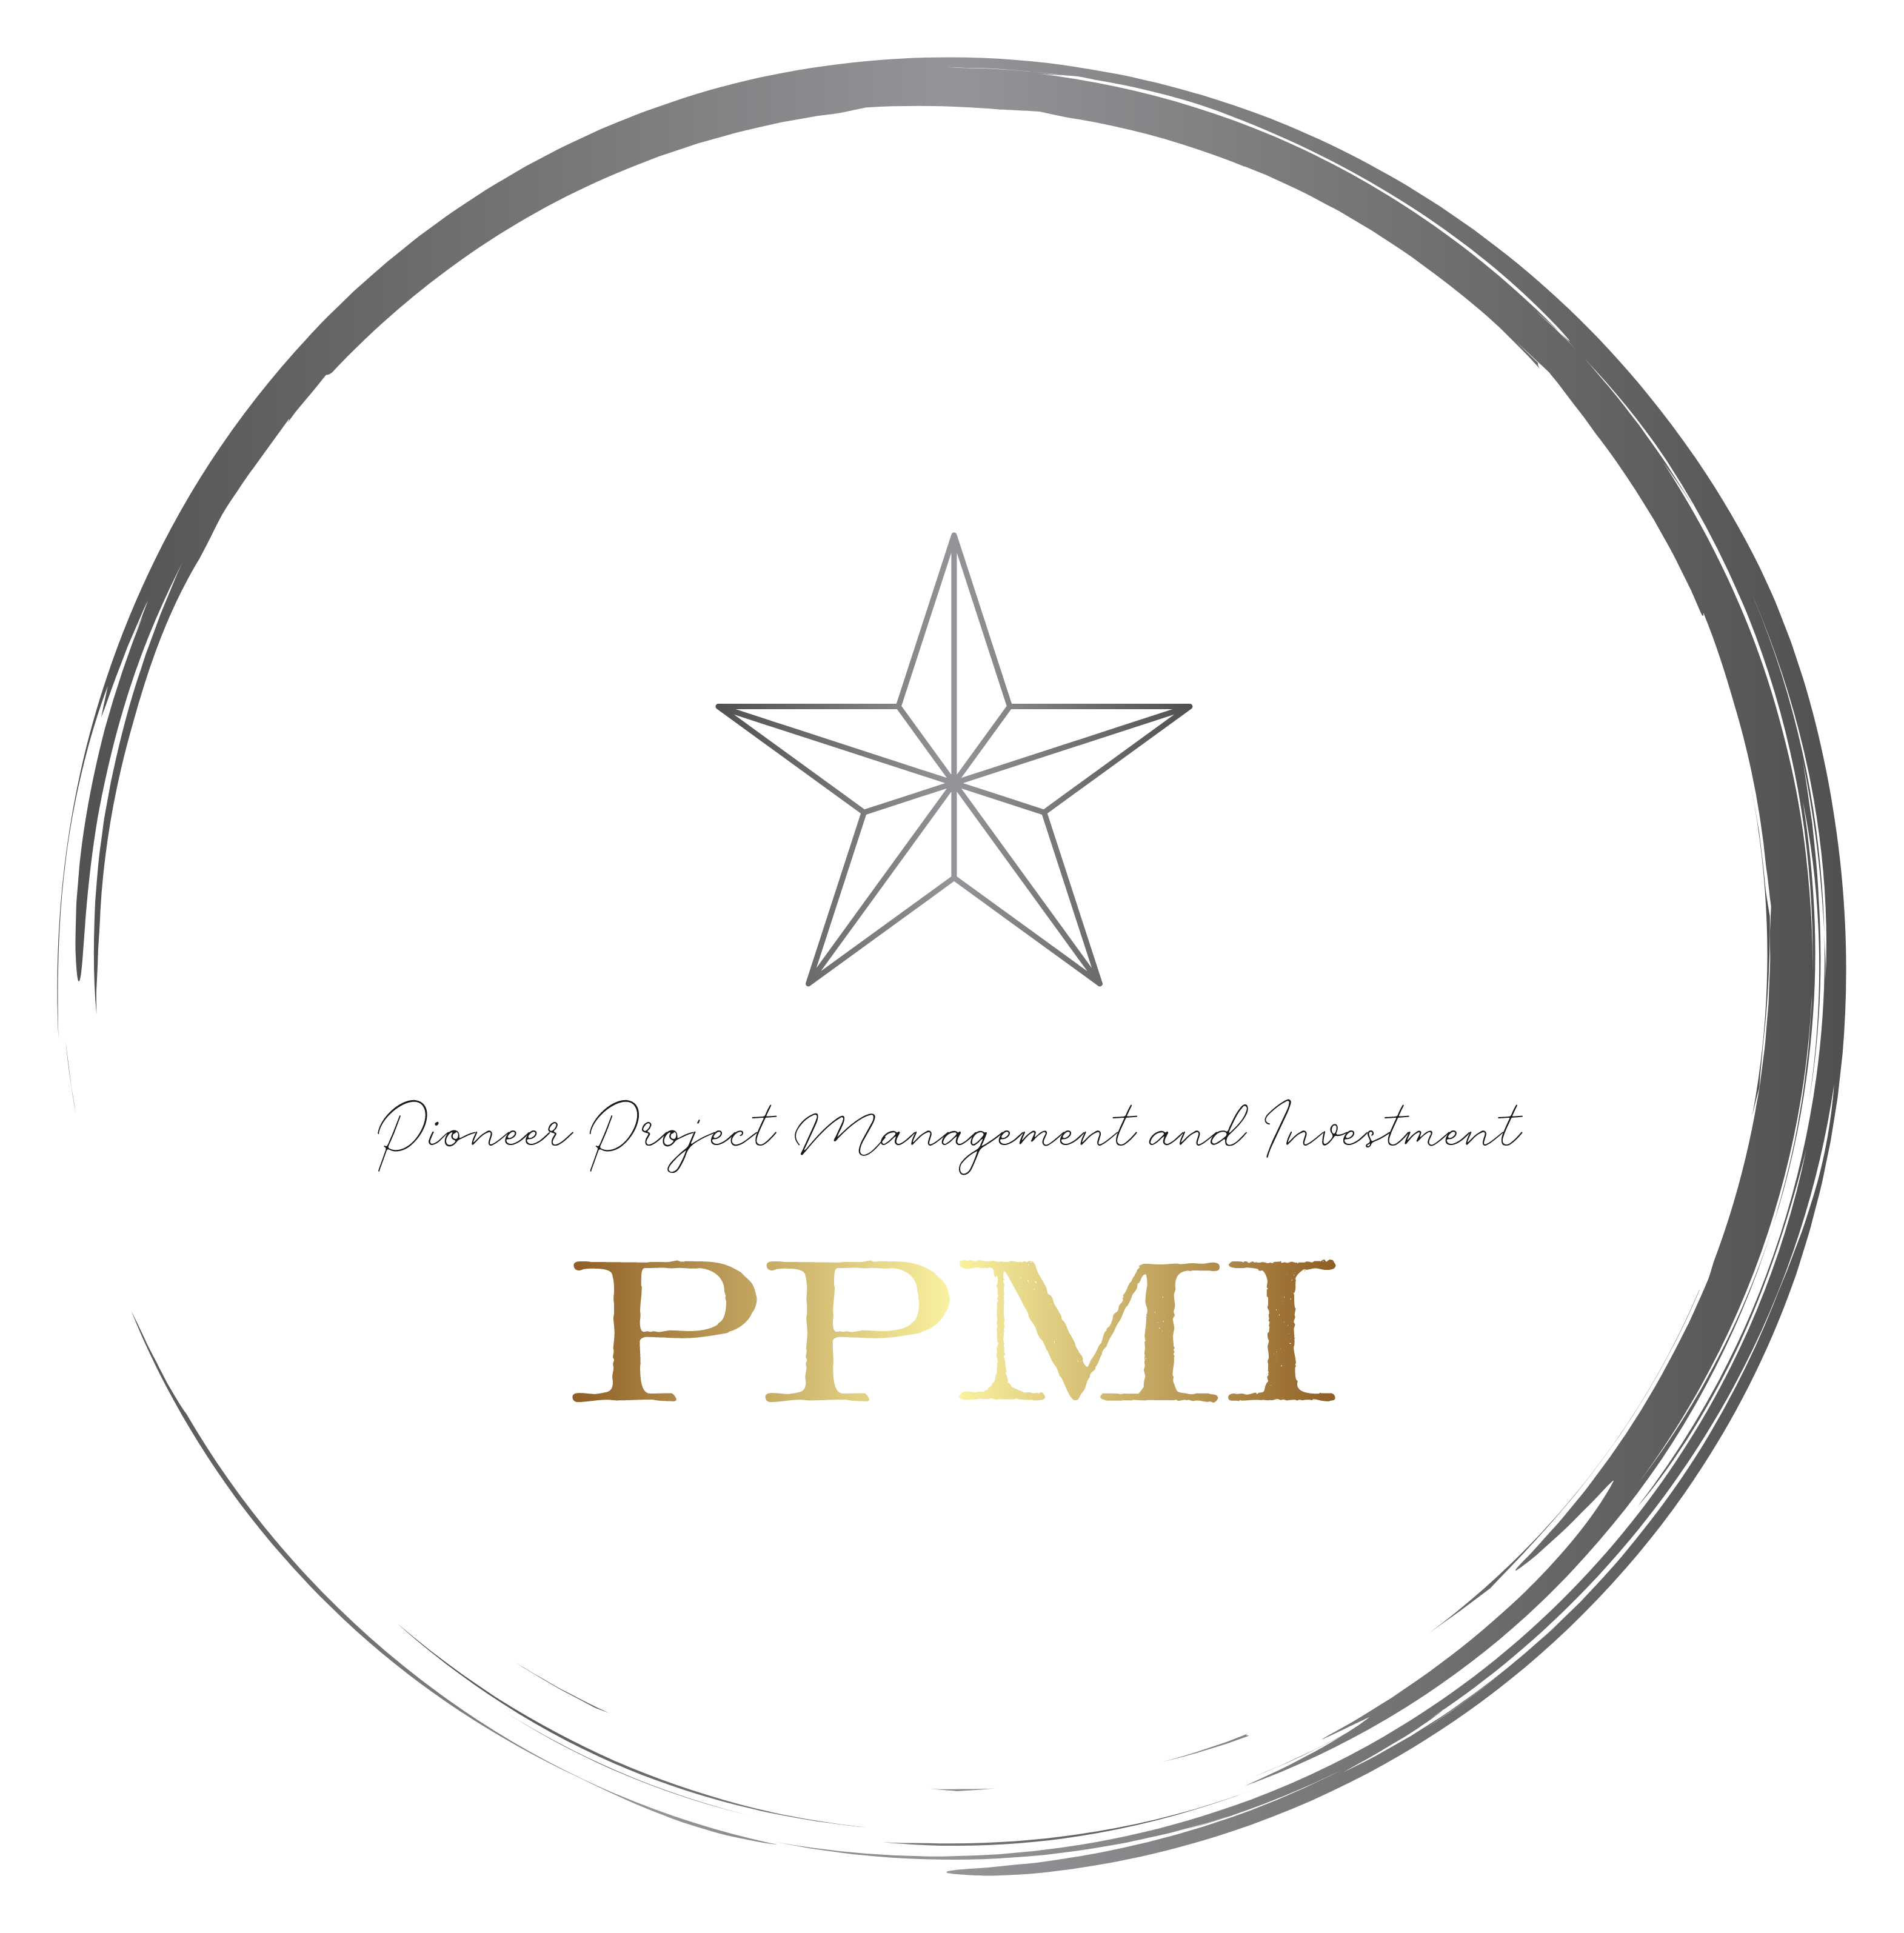 Pioneer Project Management & Investment, LLC Logo